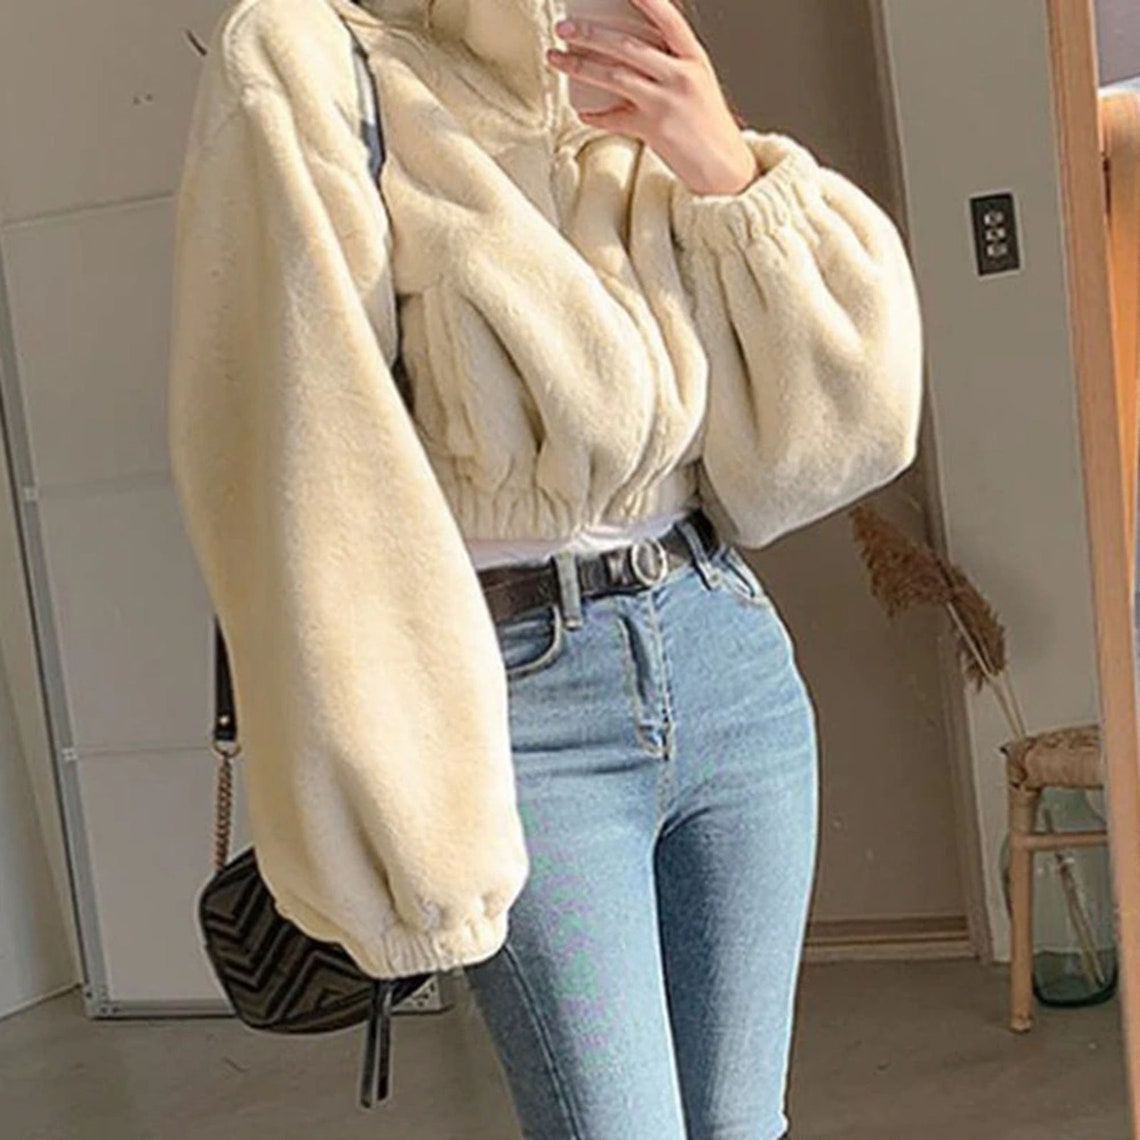 Furry Solid Soft Zipper Down Style Cropped Jacket